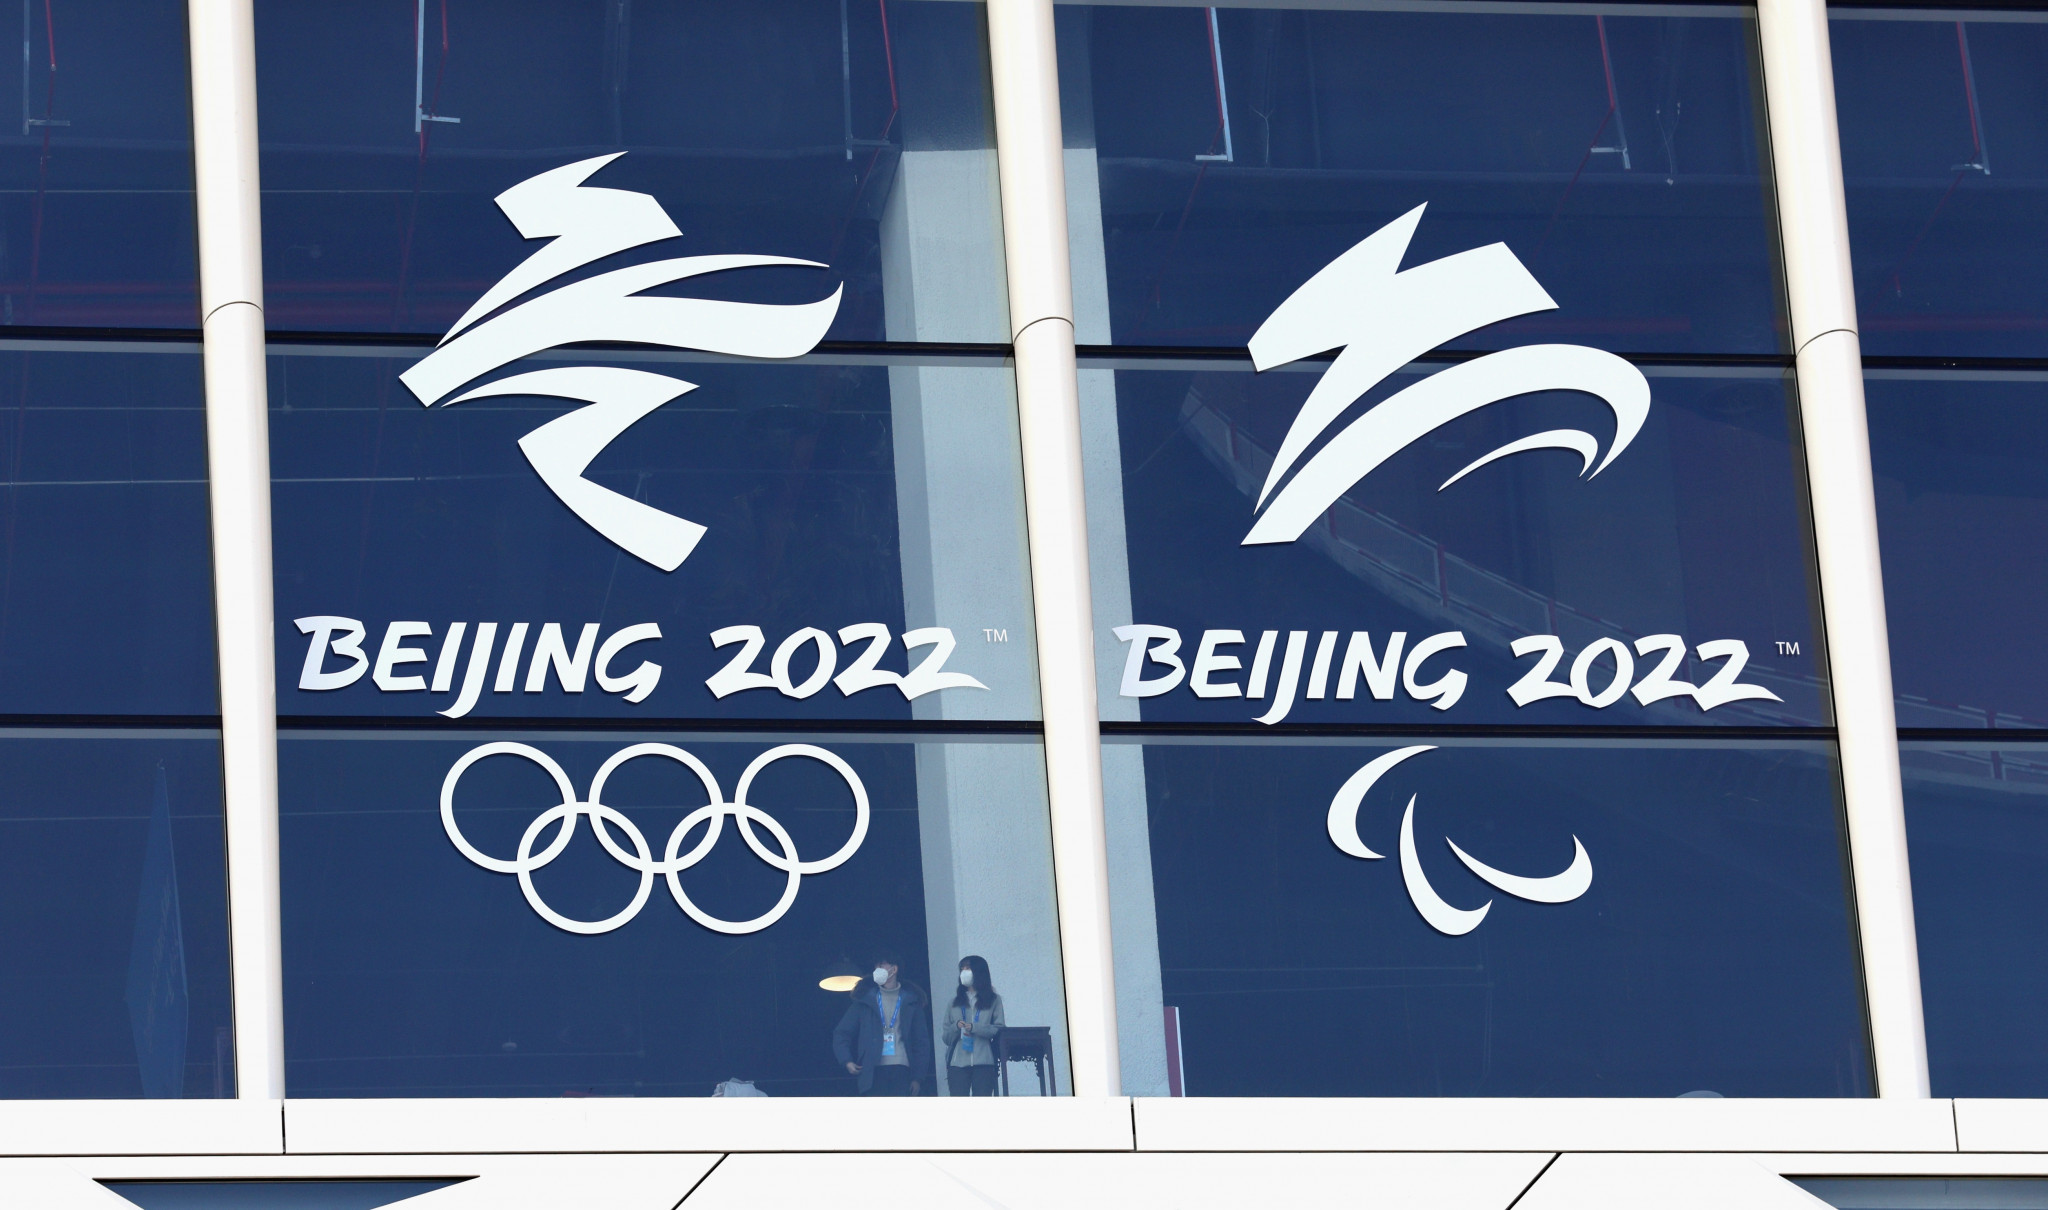 IOC defends Beijing 2022 media provisions and insists "no complaints in the remit of the Games"